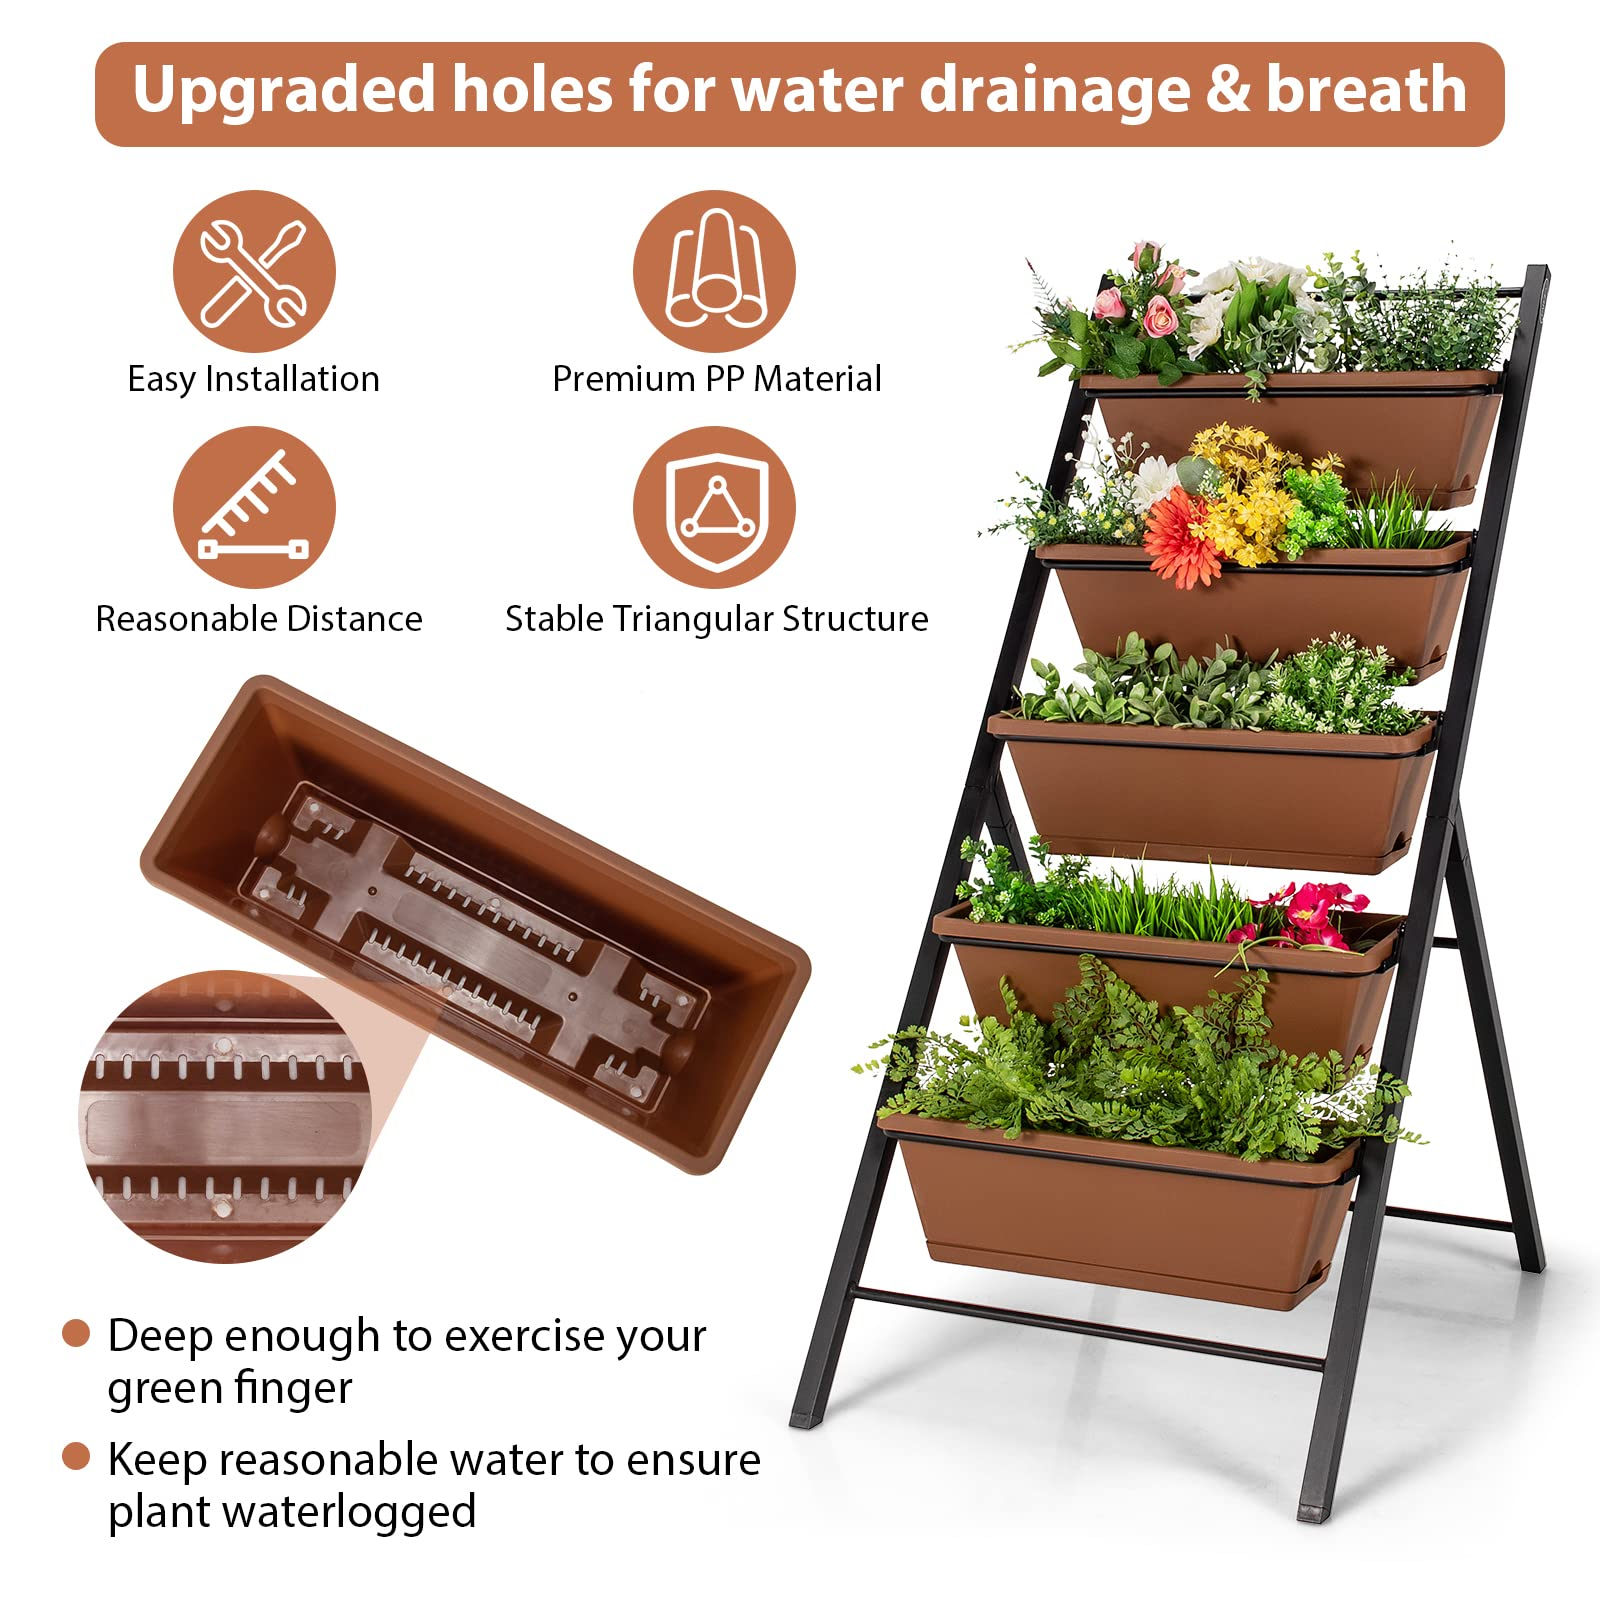 Elevated Garden Beds with Water Drainage Hole